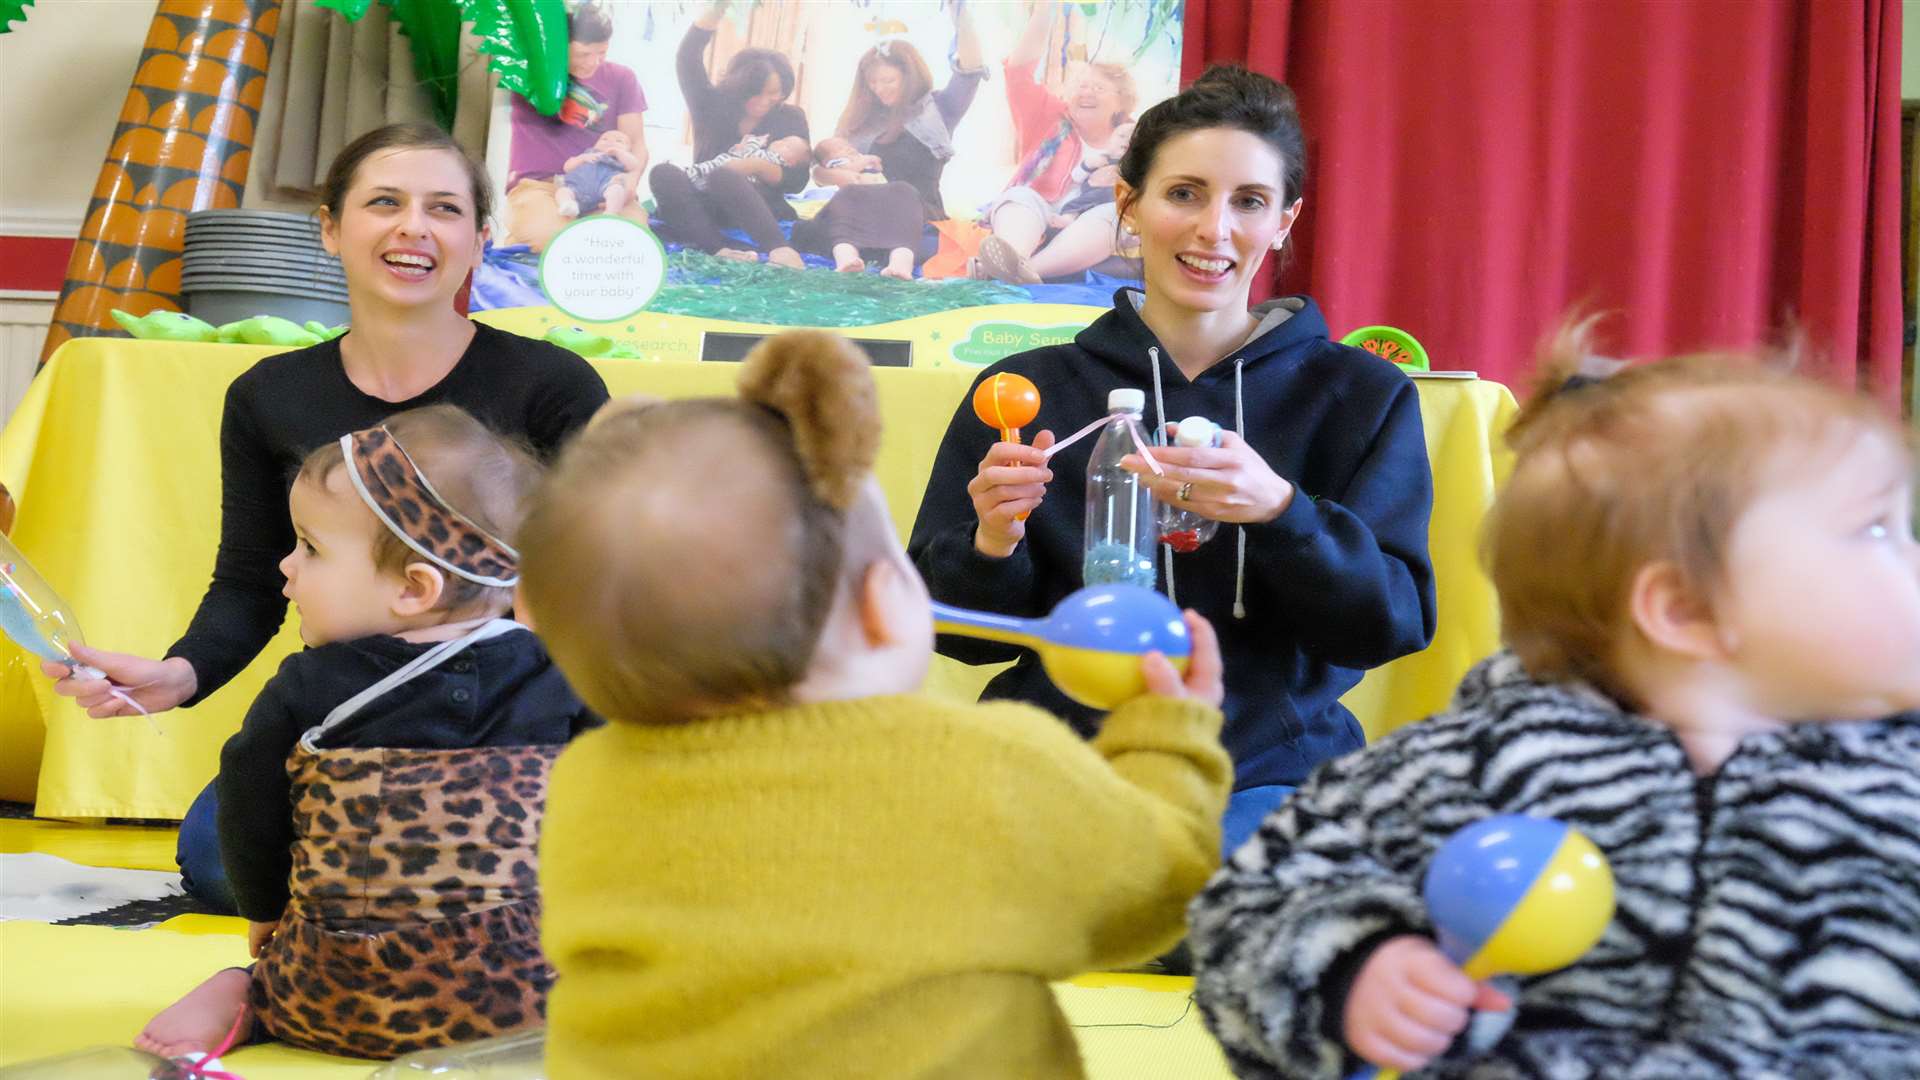 Baby Sensory classes are lively, musical groups